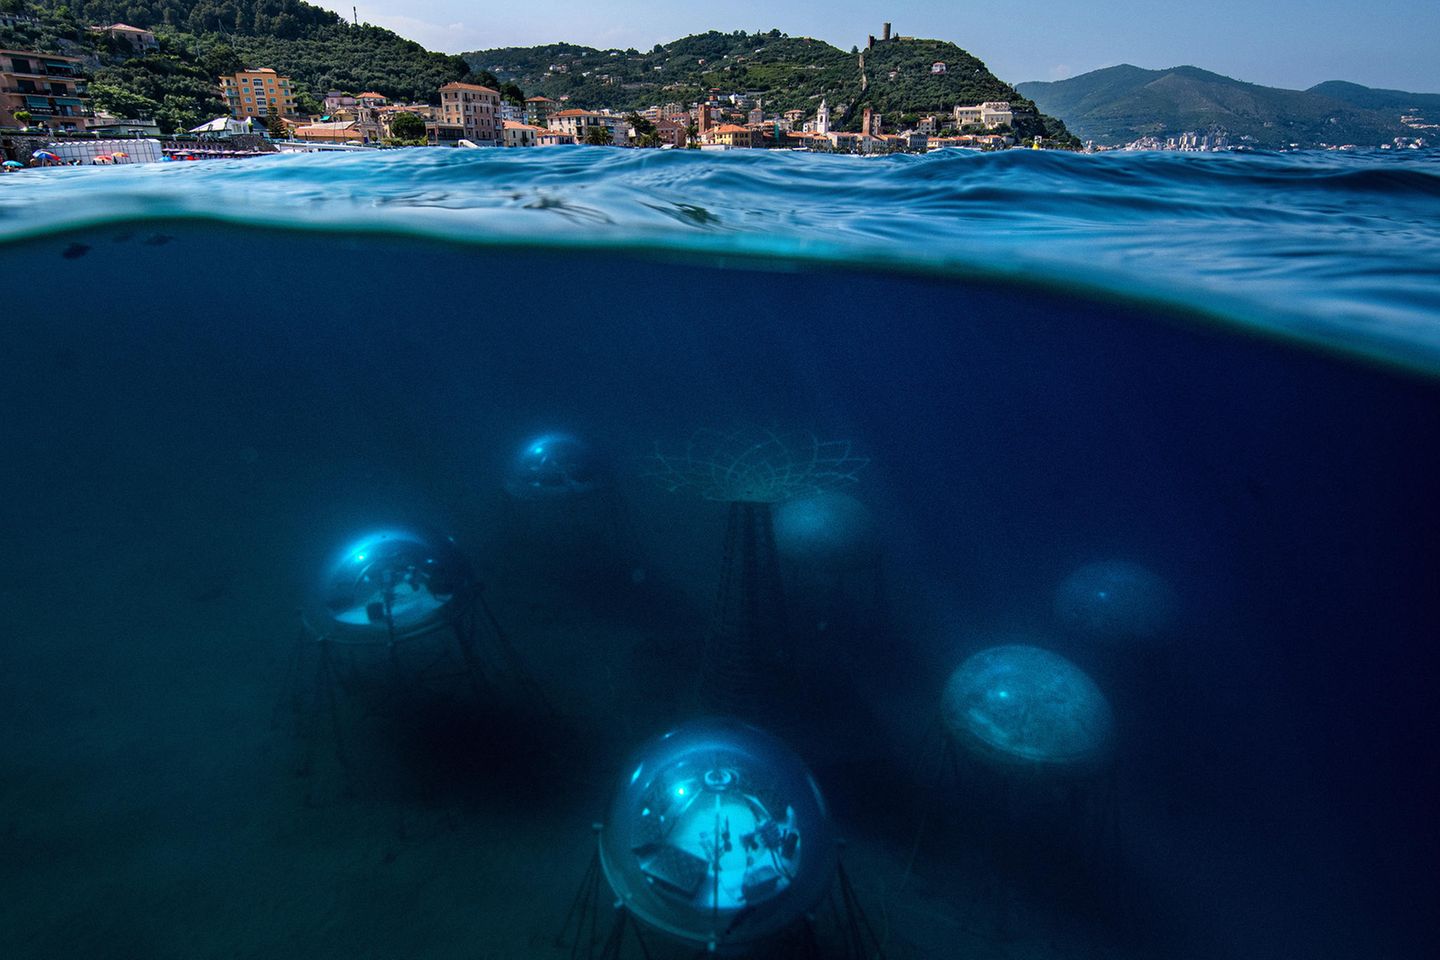 Image Name: Nemo's Garden 10  Photographer Name: Giacomo d'Orlando  Year: 2022  Image Description: <p>Nemo's Garden seen from the water’s surface. The biospheres are located 40 metres off the Noli shore – a small village on the Ligurian coast. They are constructed 6-12 meter below the surface of the water, to enable the plants to draw the necessary source of light for their development. In the centre stands the tree of life which represents the core of the experiment: the possibility of growing terrestrial plants underwater.</p>  Series Name: Nemo's Garden  Series Description: According to the Intergovernmental Panel on Climate Change (IPCC), the desertification brought by climate change in recent years has already extensively reduced agricultural productivity in many regions of the world. Agriculture represents 70% of freshwater use around the globe and with the world’s population projected to increase to 10 billion by the end of the century, it has become imperative to find alternative and ecologically sustainable methods of cultivation. Nemo’s Garden – the world’s first underwater greenhouse – offers a possible solution. This completely self-sustainable project explores an alternative farming system that could be implemented in areas where environmental or geo-morphological conditions make the growth of plants almost impossible. The encouraging results of the last few years, where more than 40 different species of plants have been successfully cultivated, gives hope that a sustainable agricultural system has been developed to help tackle the new challenges brought by climate change.